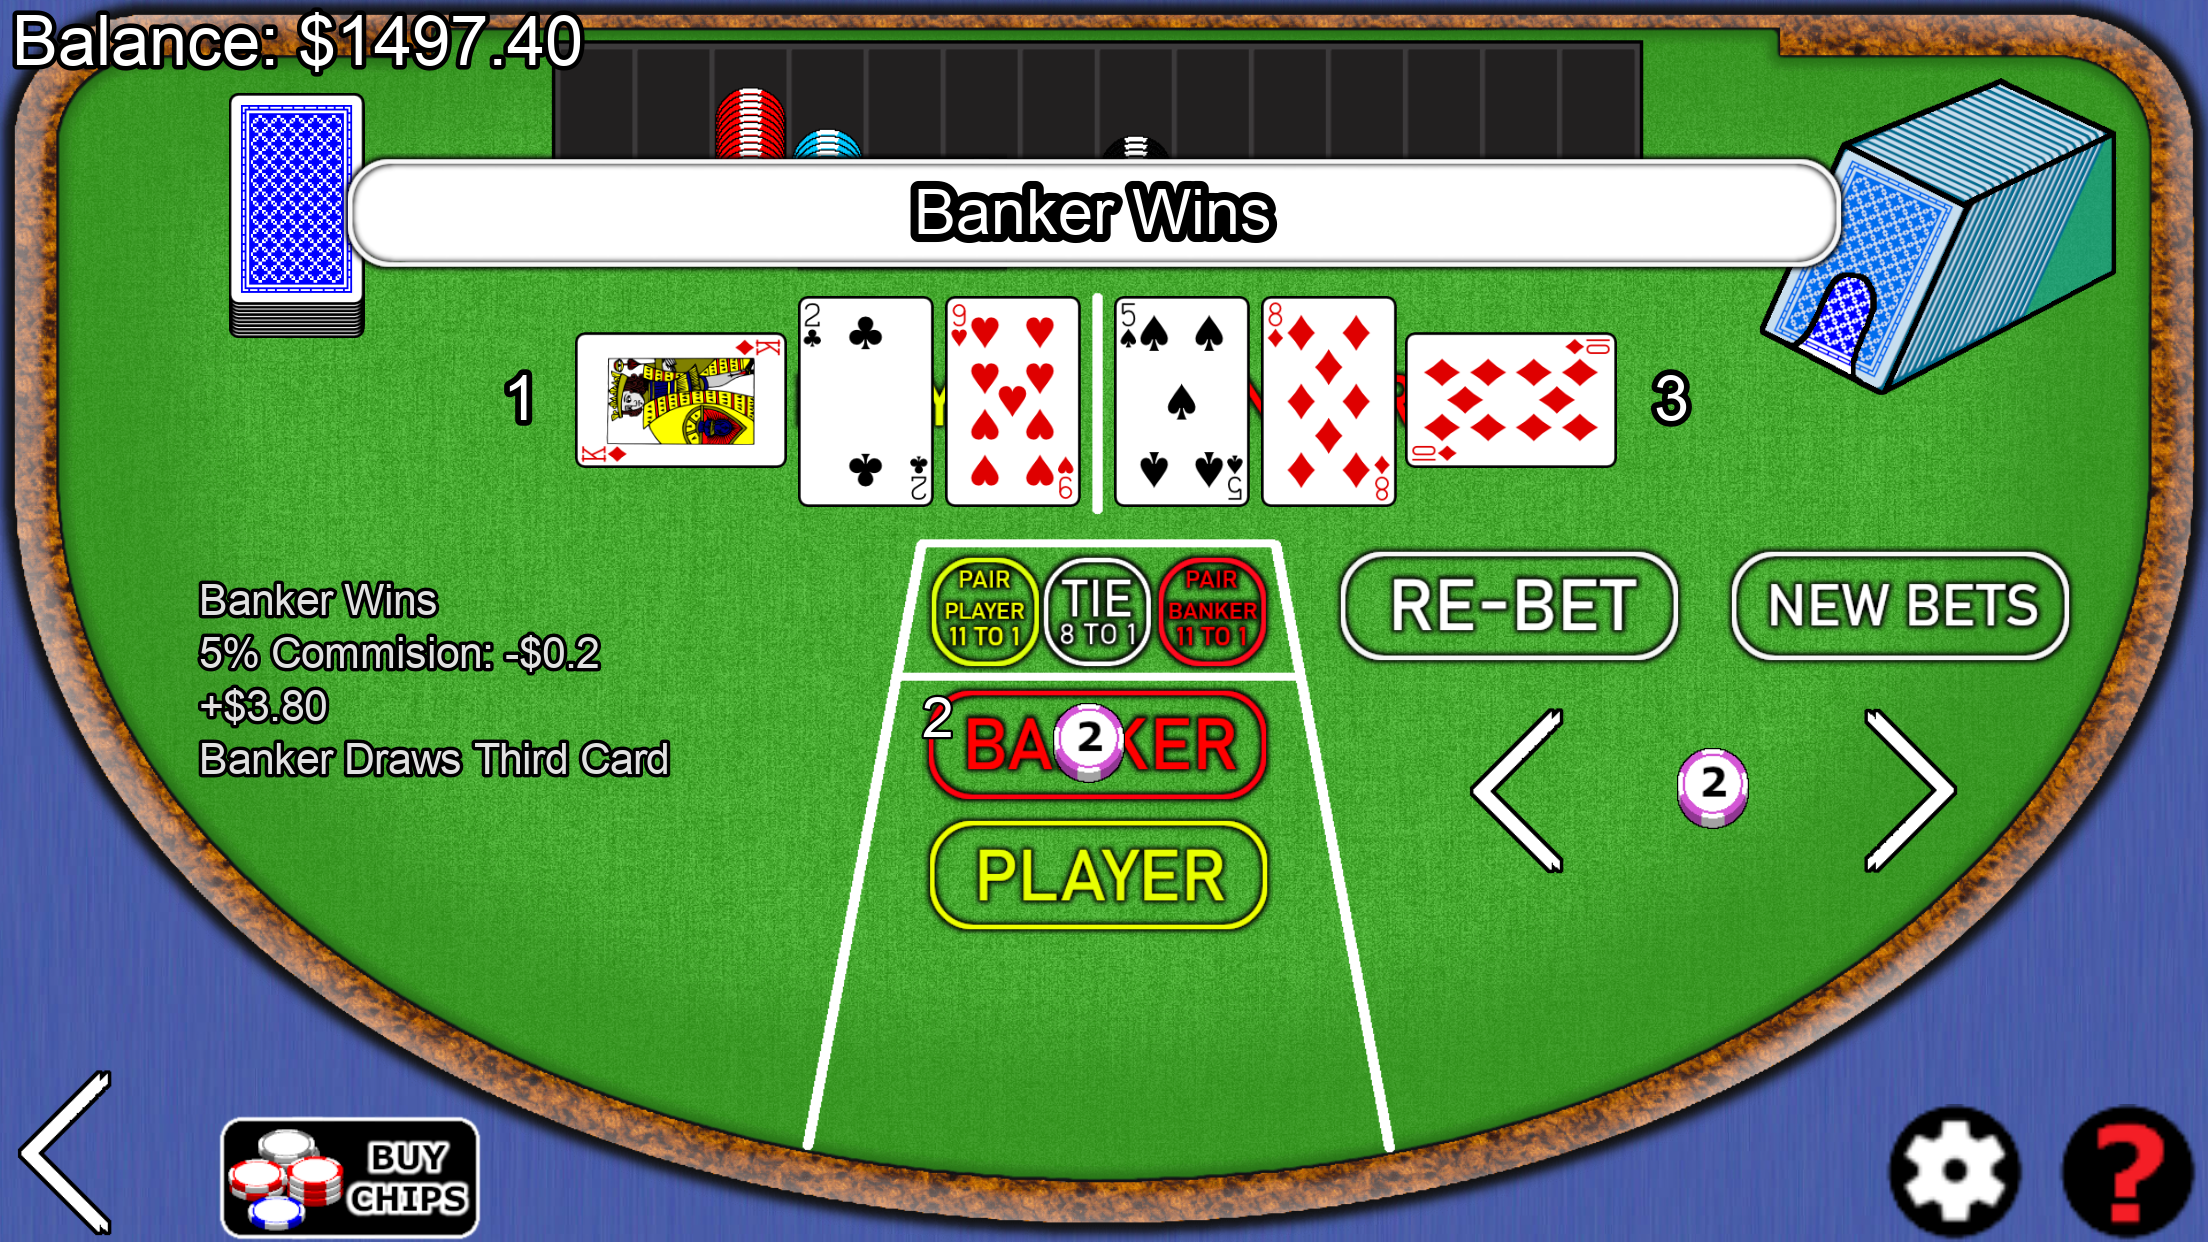 How to play the casino game Baccarat